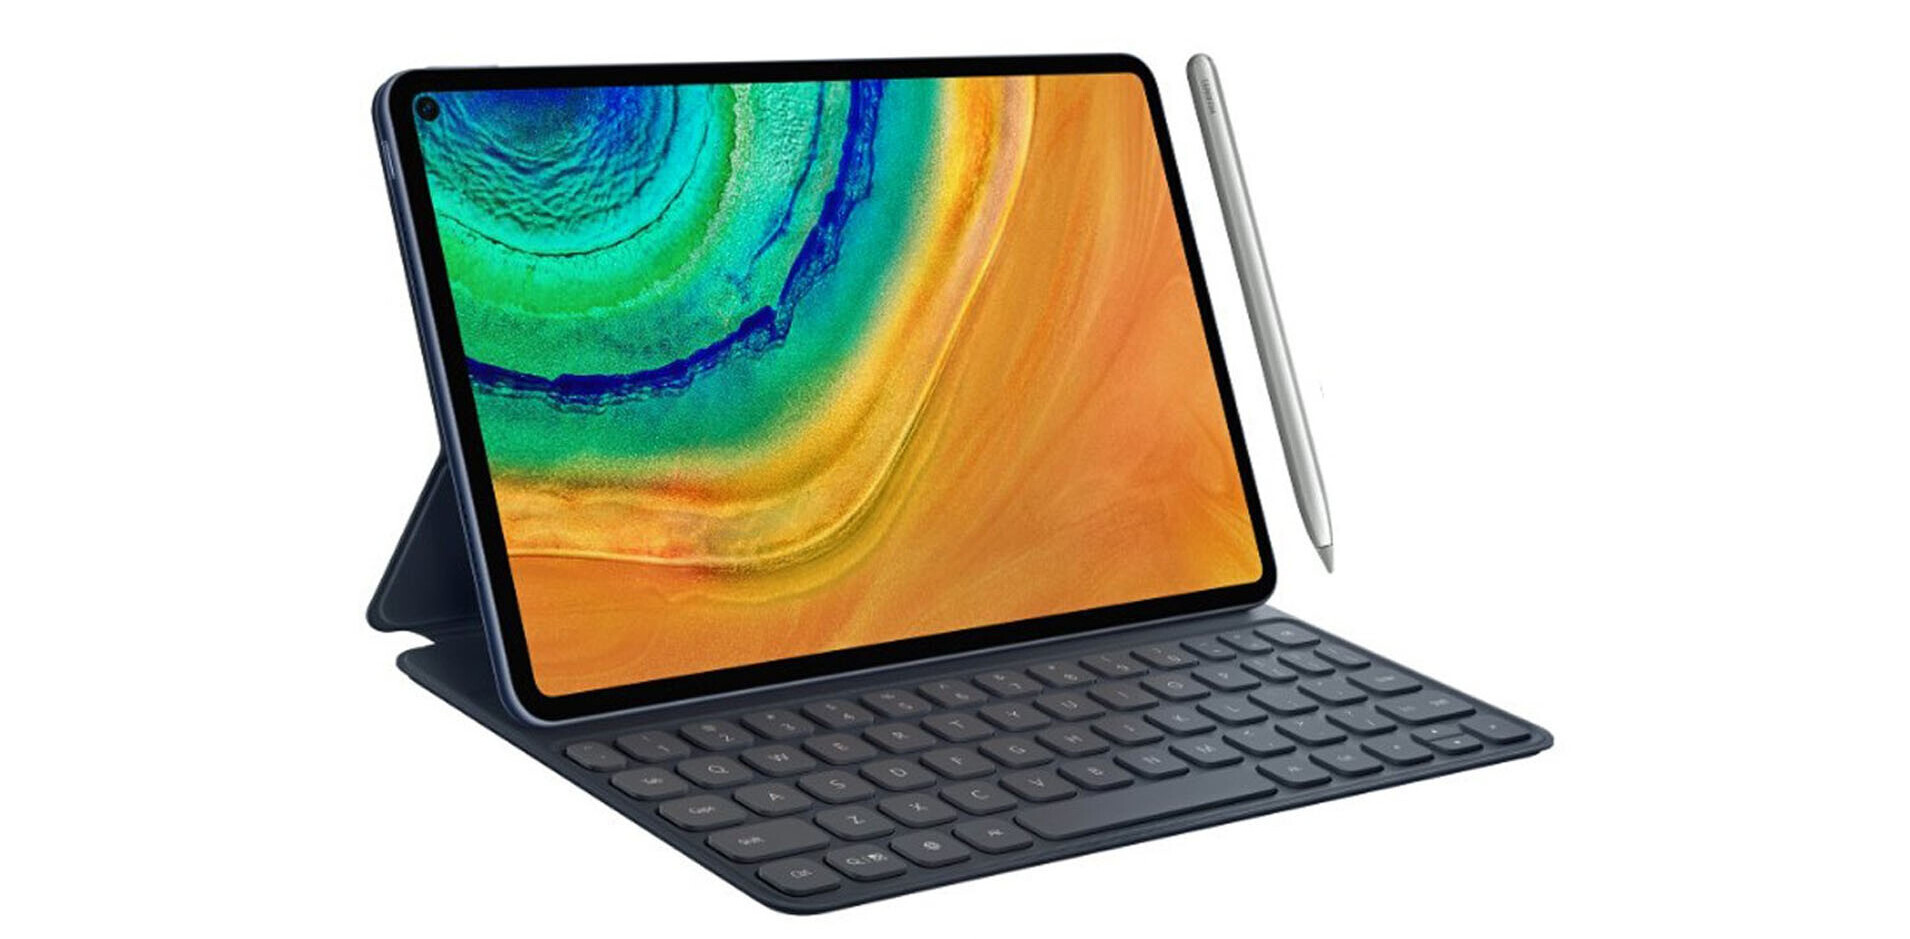 Huawei will reveal its iPad Pro competitor on November 25